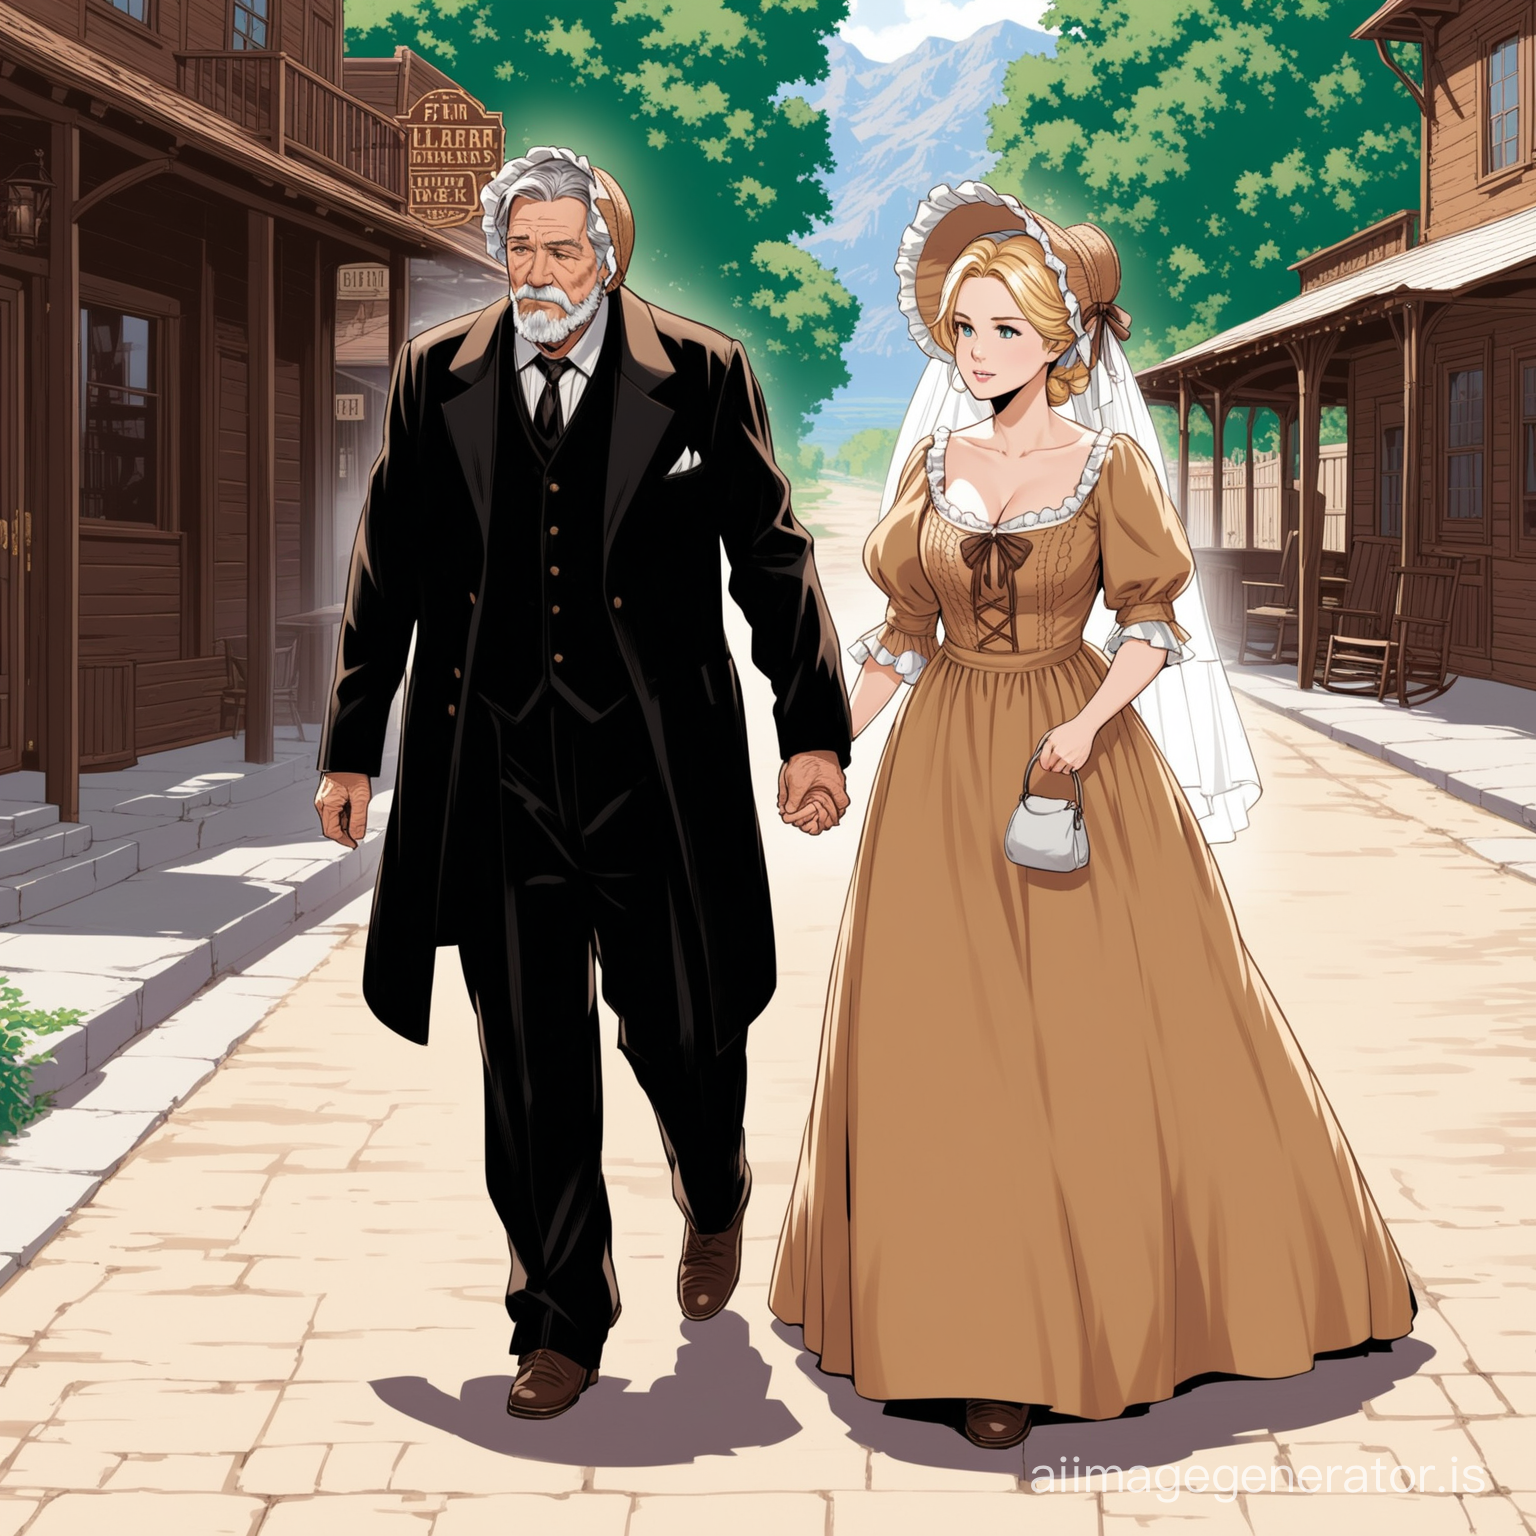 Susan Storm from the FF4 dressed as an old west farmer's wife wearing a calicot floor-length loose billowing old west poofy modest dress with a frilly bonnet walking on a old west era sidewalk with an old man dressed into a black suit who seems to be her newlywed husband